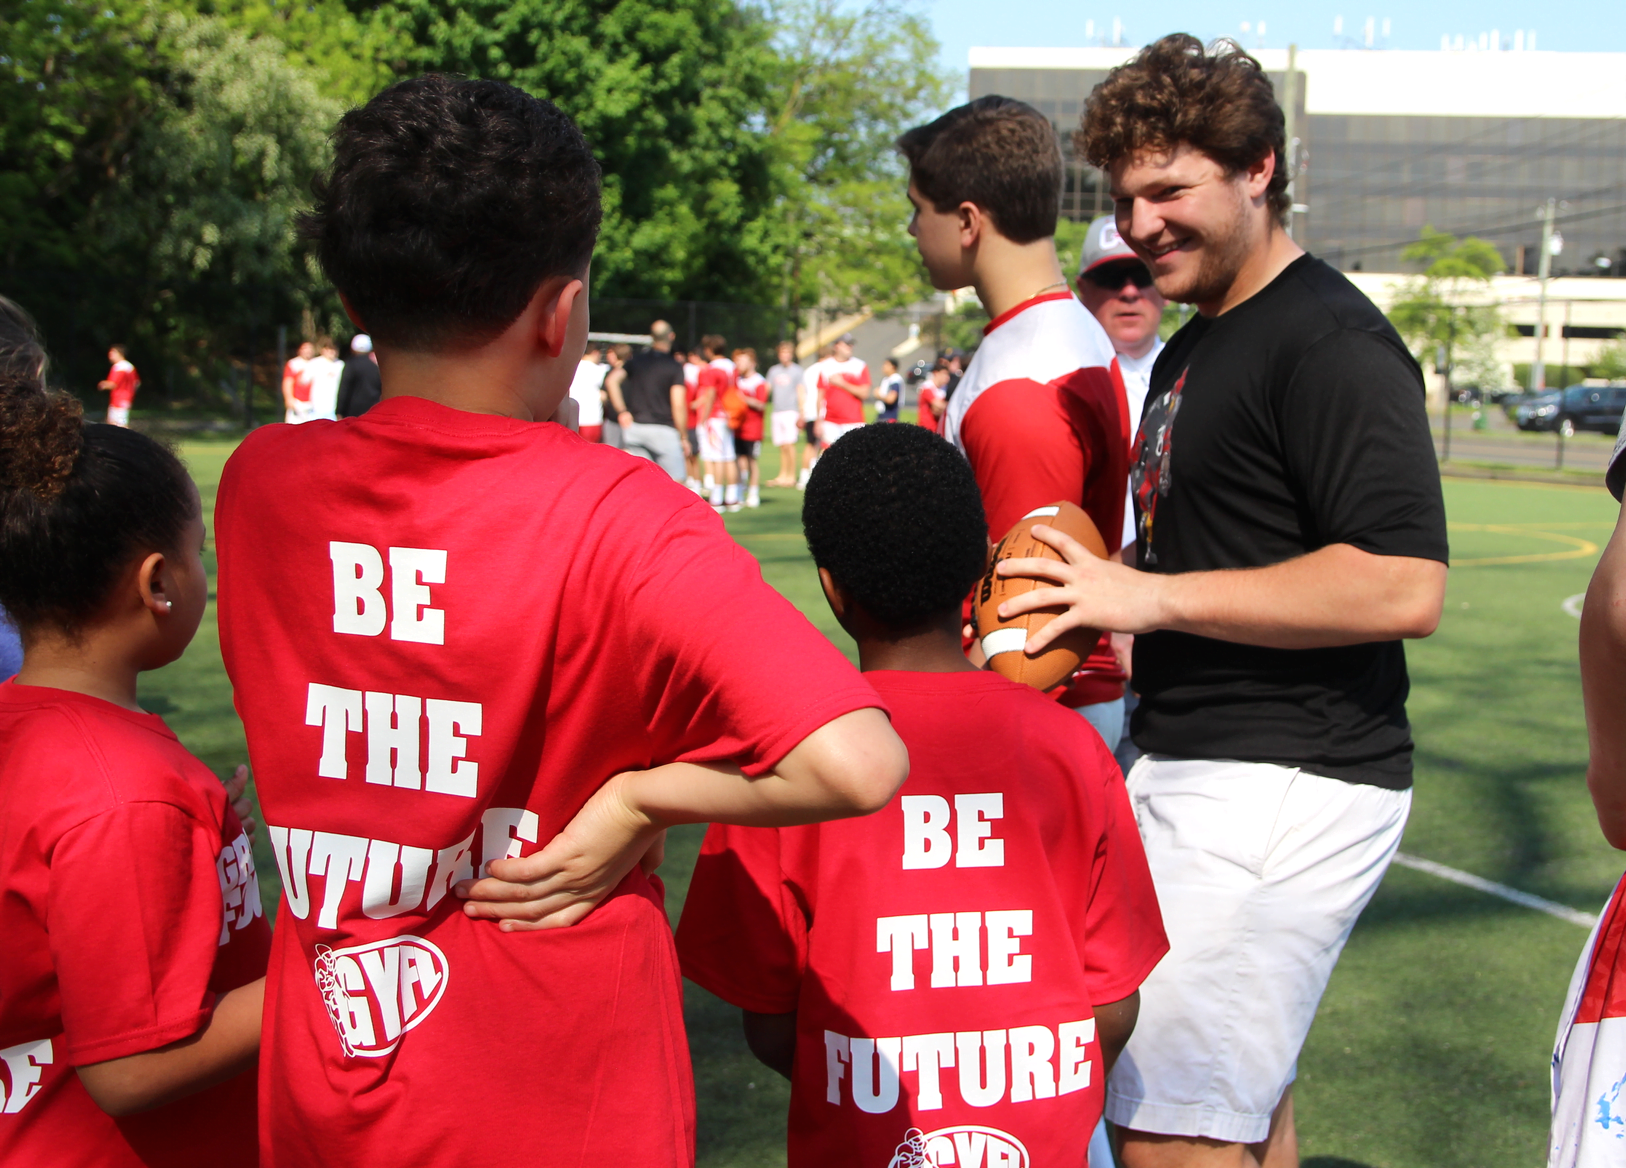 Greenwich Cardinals football team members worked with younger players during a clinic organized with the GYFL at the Boys & Girls Club of Greenwich. May 19, 2019 Photo: Leslie Yager